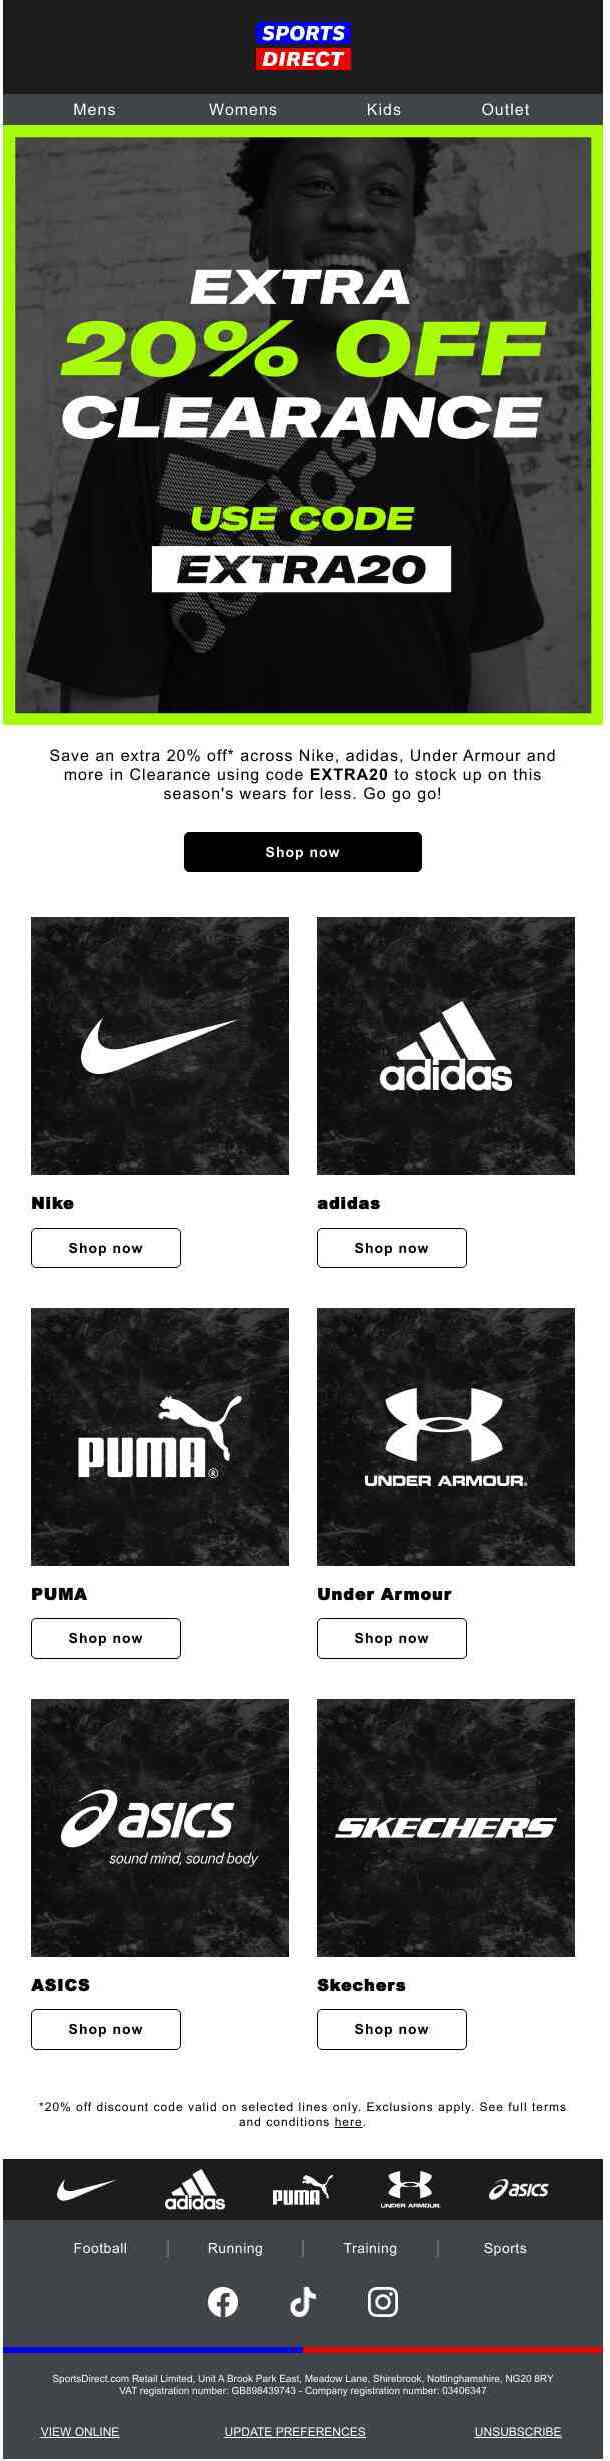 EXTRA 20% OFF Clearance: Nike, adidas & more!